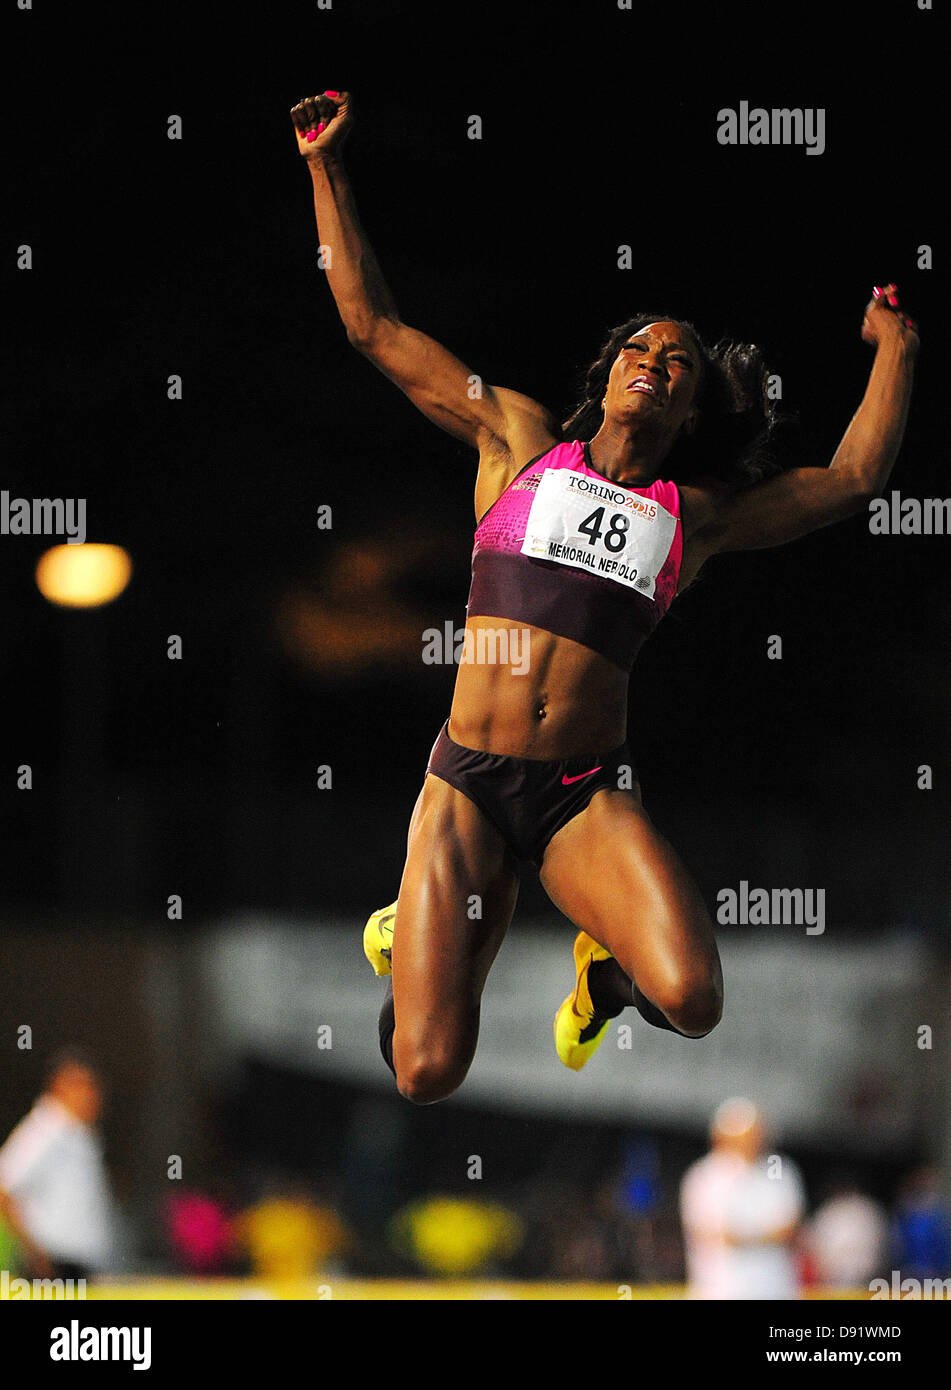 08.06.2013 Torino, Italy. Funmi Jimoh of the USA wins the Womes Long Jump during the International Athletics meeting Memorial Primo Nebiolo from the Stadio Primo Nebiolo. Stock Photo